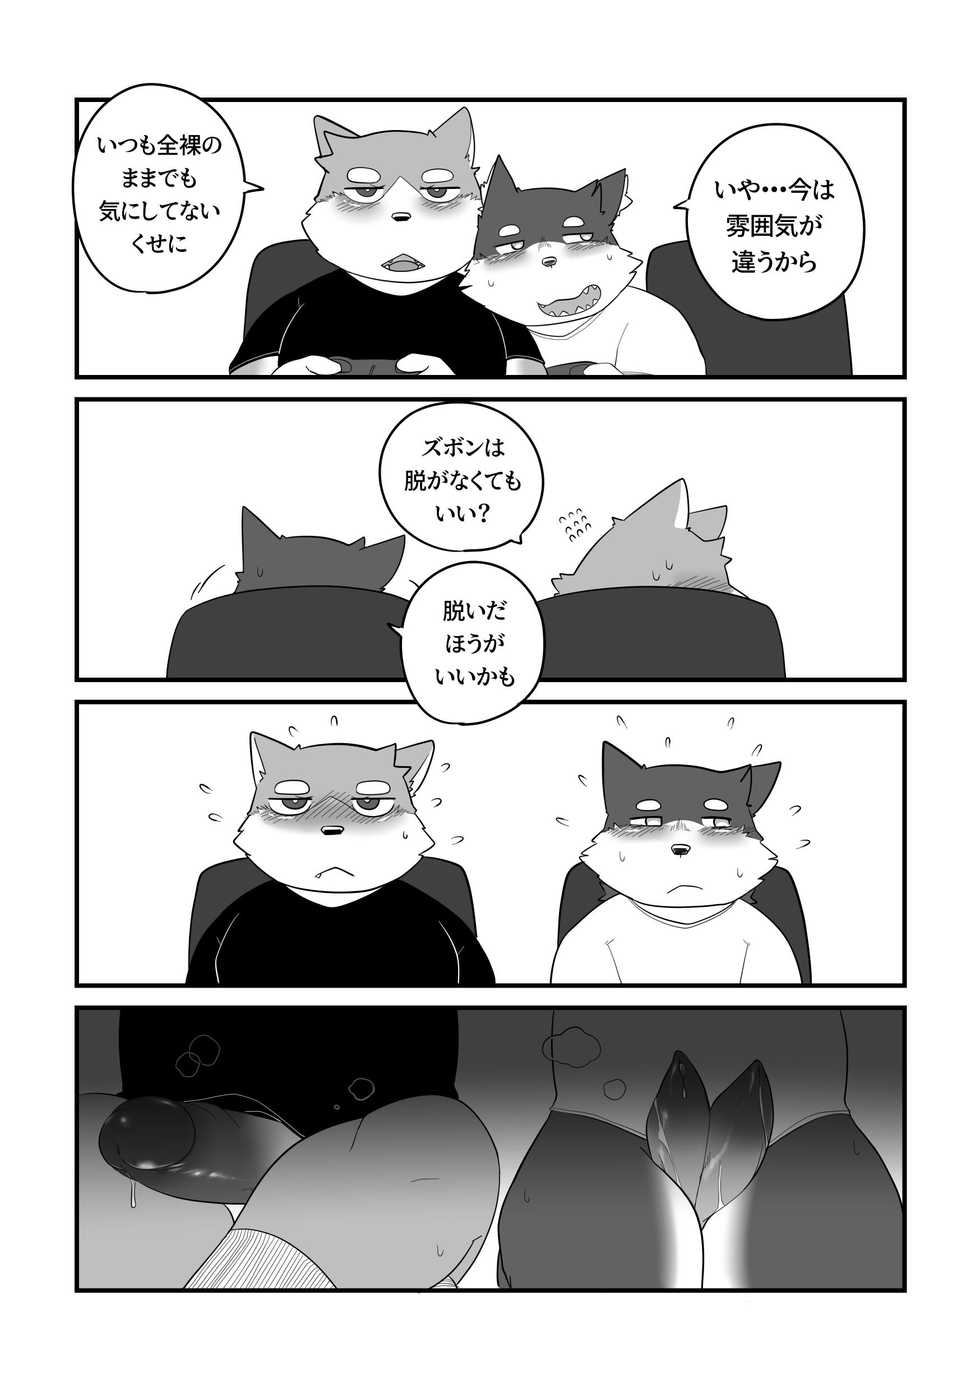 [Bighornsheep] Daily Life in Winter [Japanese] - Page 7